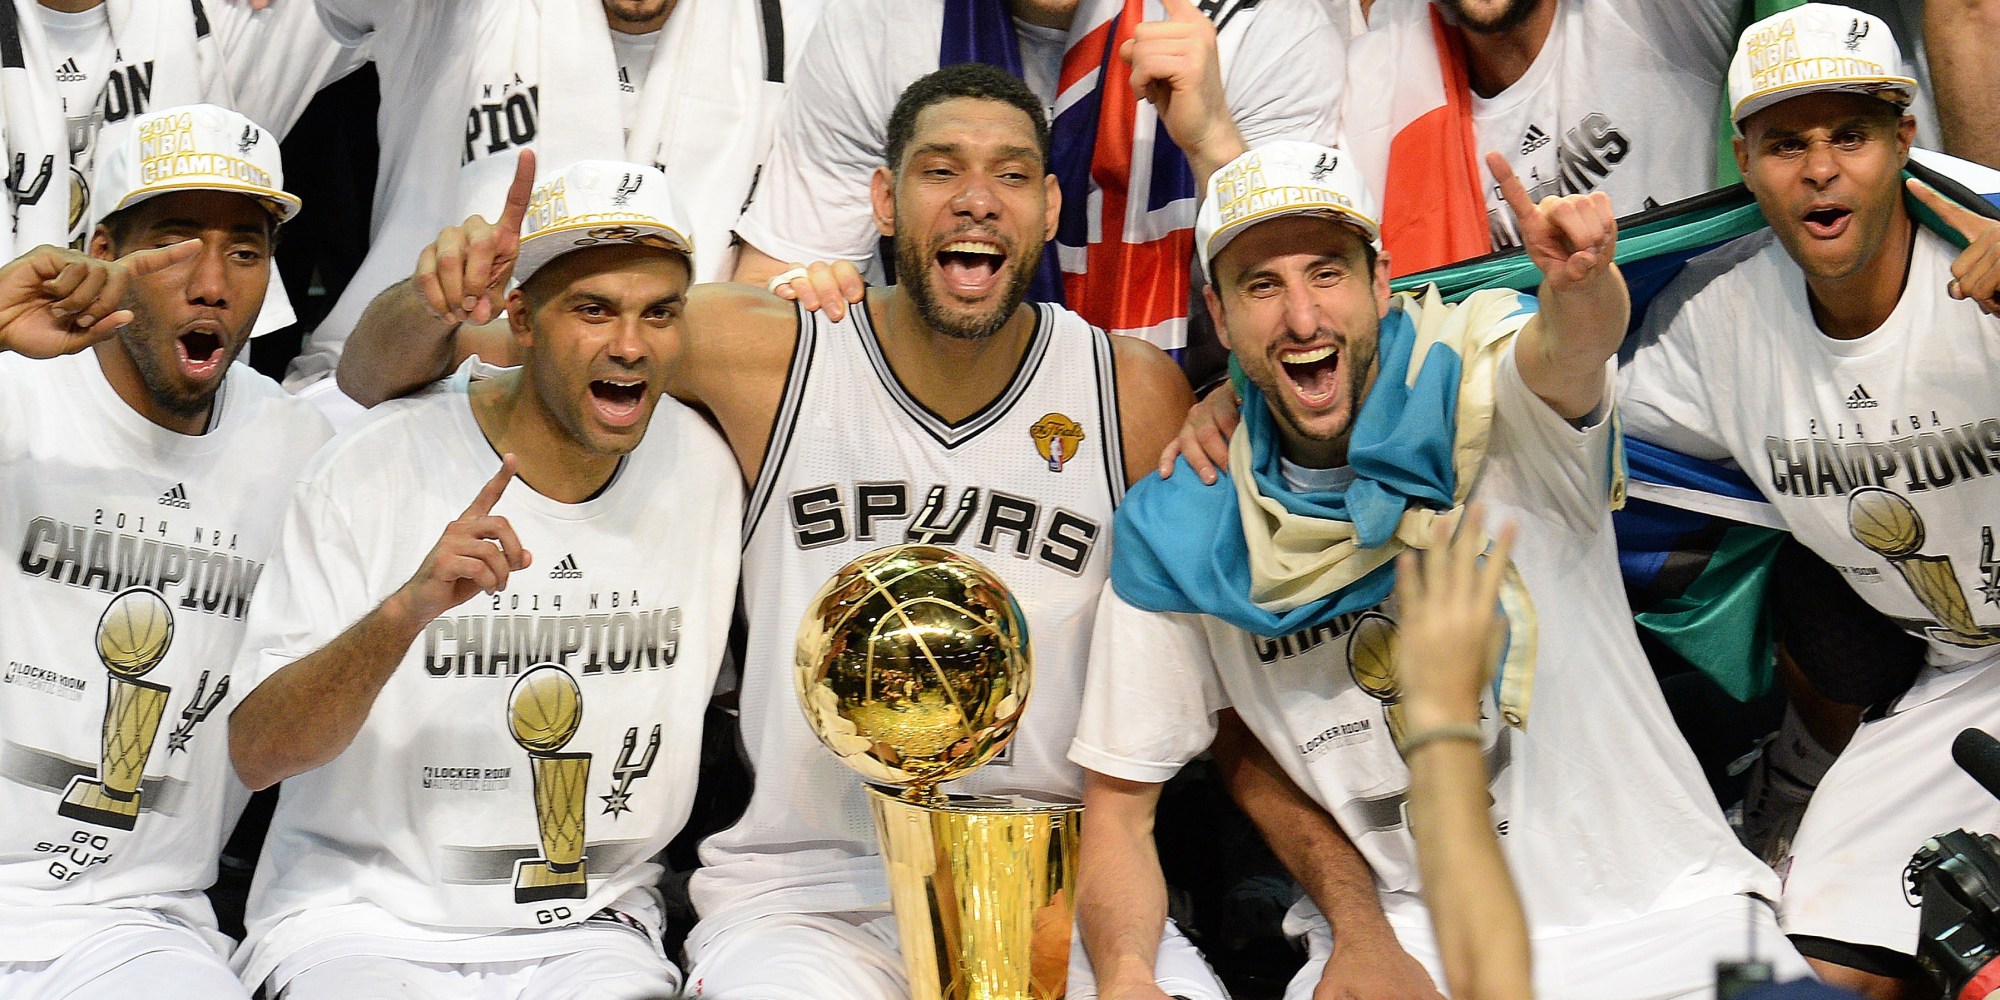 The San Antonio Spurs celebrate with the Larry O'Brien NBA Championship Trophy after the Spurs defeated the Miami Heat 107-84 in Game 5 of the NBA Finals to win the NBA Finals Championship, June 15, 2014 in San Antonio,Texas.  From left are: MVP Kawhi Leonard, Tony Parker, Tim Duncan, Manu Ginobili and Patty Mills.   The Spurs won the best of seven series 4-1.  AFP PHOTO / Robyn Beck        (Photo credit should read ROBYN BECK/AFP/Getty Images)